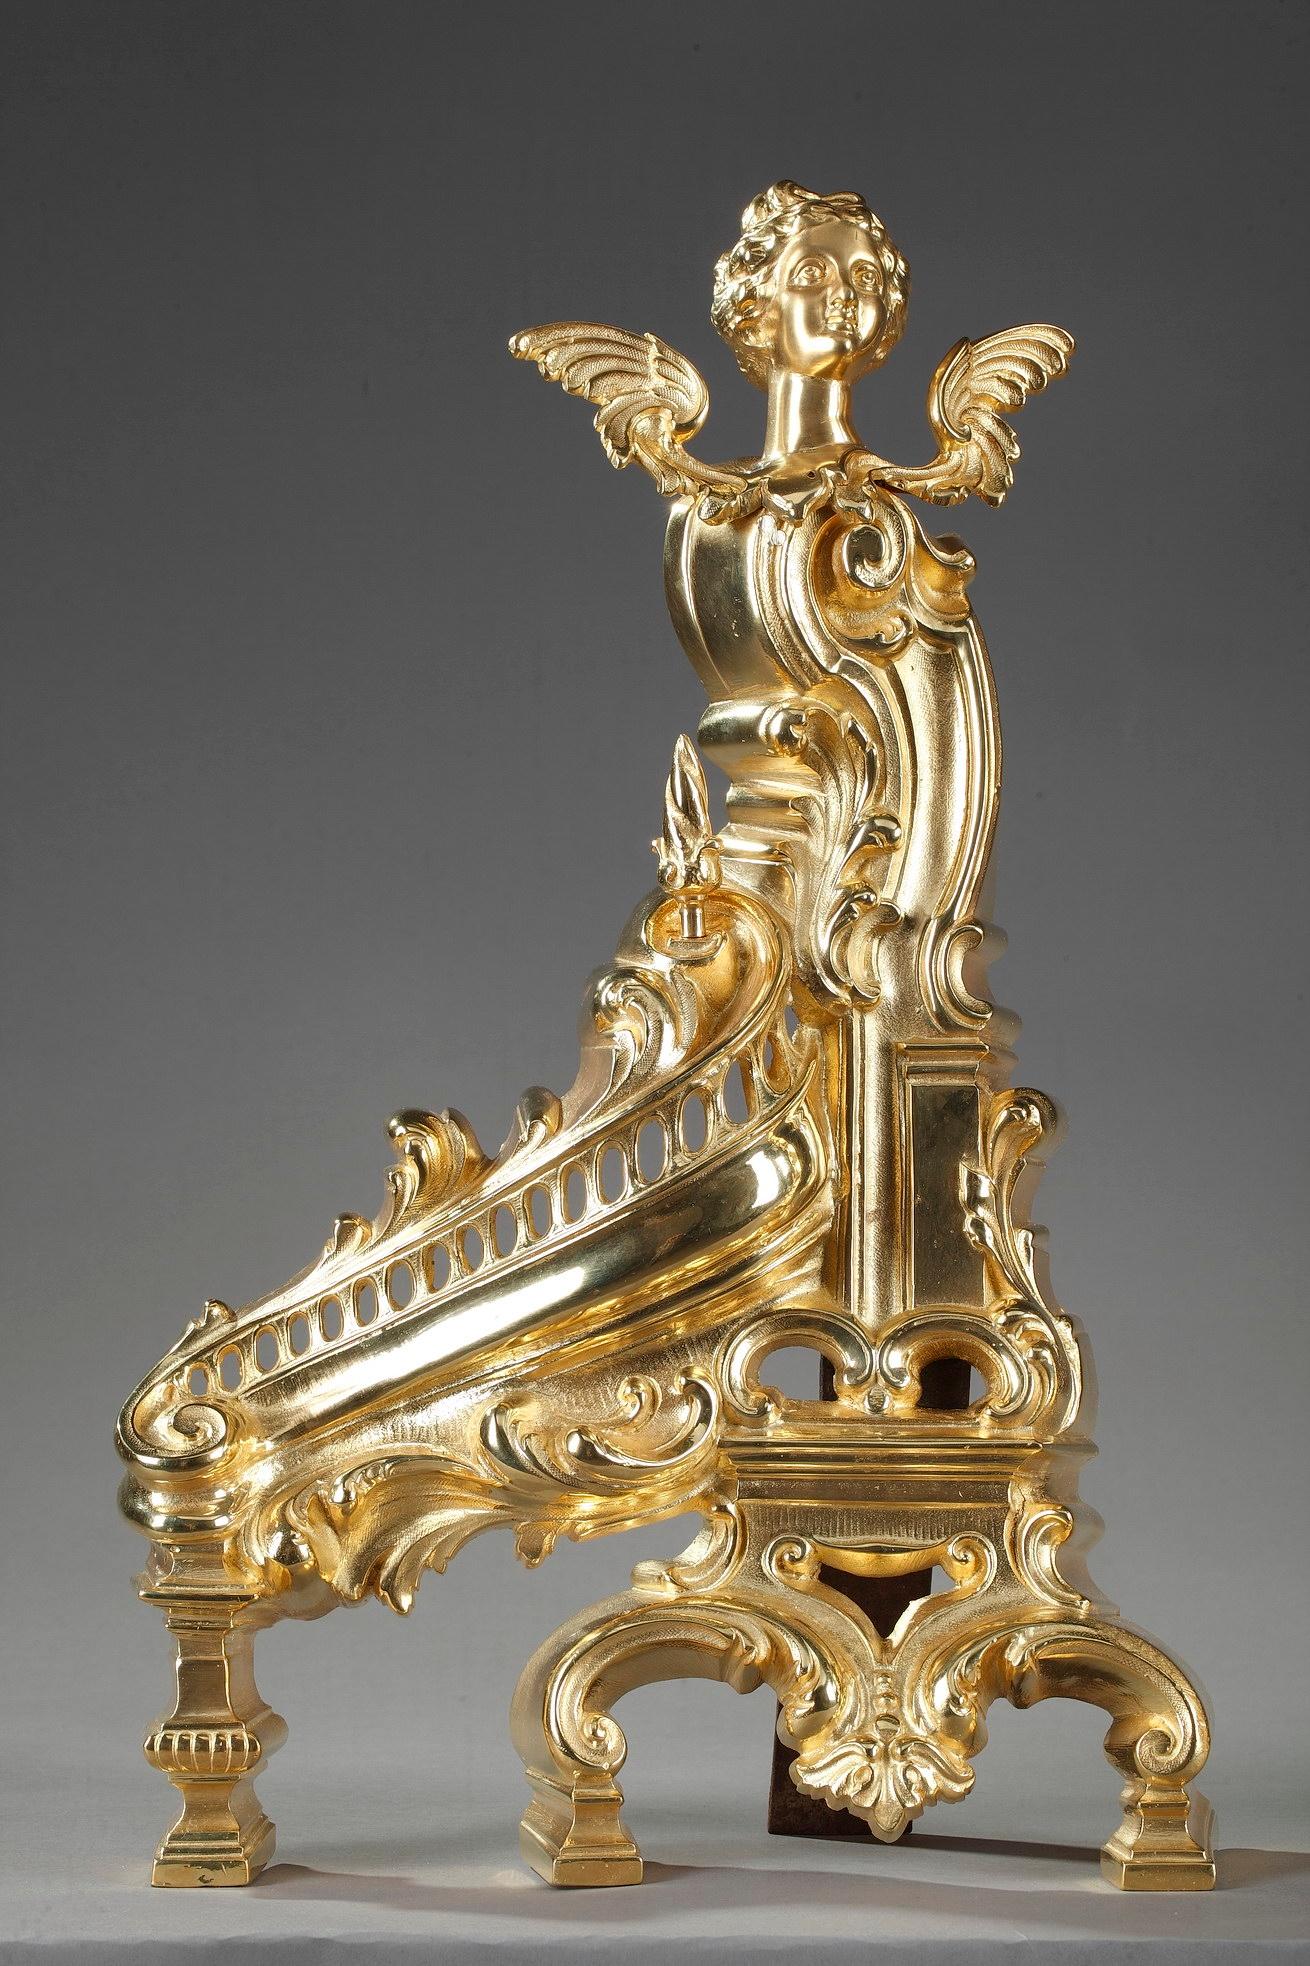 Pair of gilt bronze andirons with rich rococo decoration such as acanthus leaves, pierced ova and exuberant scrollwork. They are topped by two majestic winged women. Andirons, or chenets, are decorative and practical objects placed in front of a